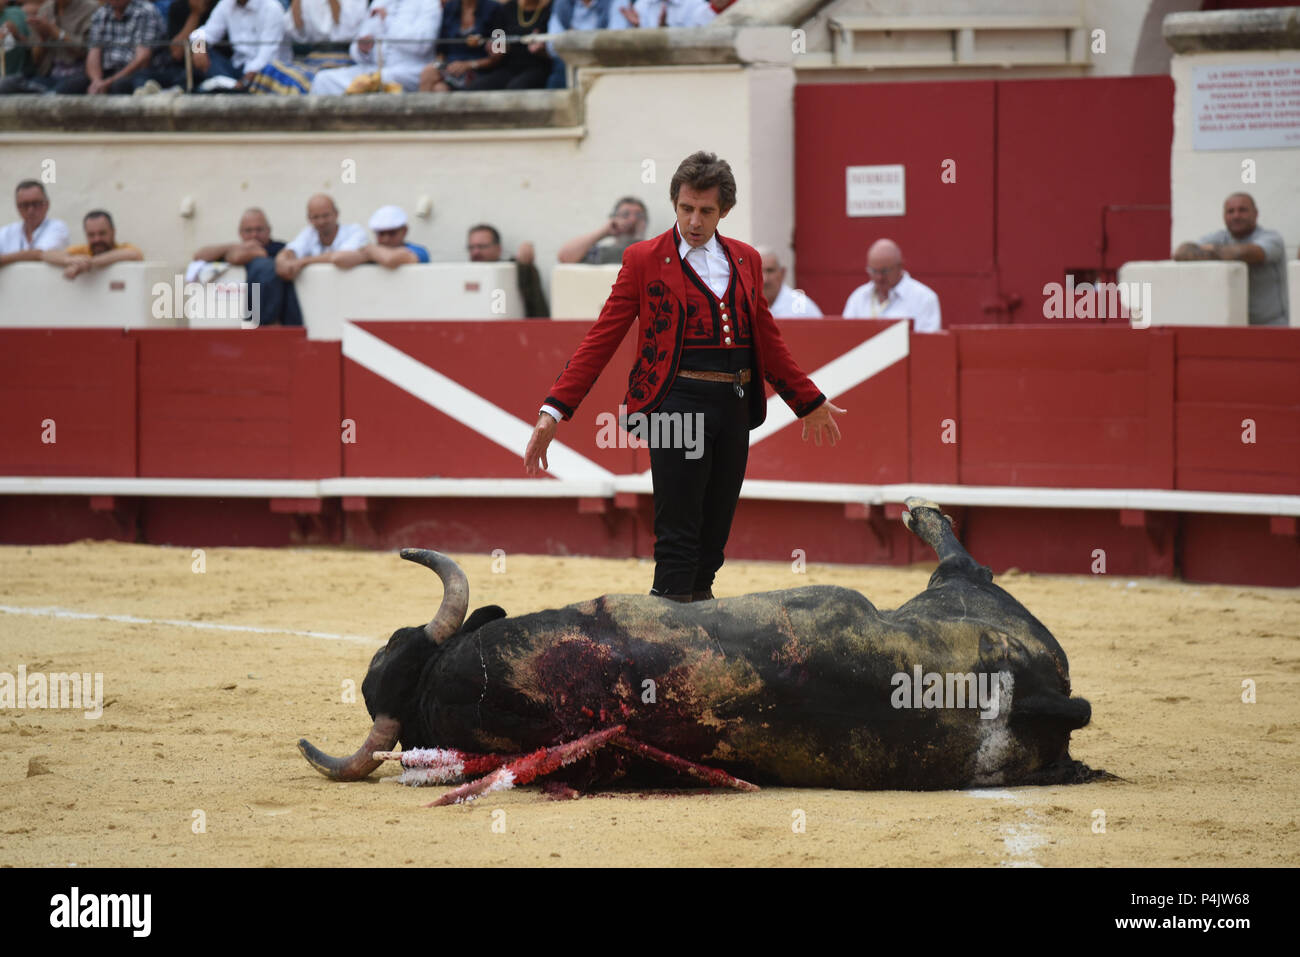 August 13, 2015 - Beziers, France: Spanish 'rejoneador' Pablo Hermoso de Mendoza, one of the most famous bullfighters on horseback, performs during a corrida in Beziers. Despite growing opposition from animal right groups, bullfighting remains popular in southern France. Bullfighting aficionados report that the practice is even more genuine in southern France than in neighboring Spain because bullfighting is being organized at a municipal level, by groups of people committed to the tauromachy traditions.  Corrida organisee dans le cadre de la feria de Beziers. Le maire de Beziers Robert Menard Stock Photo